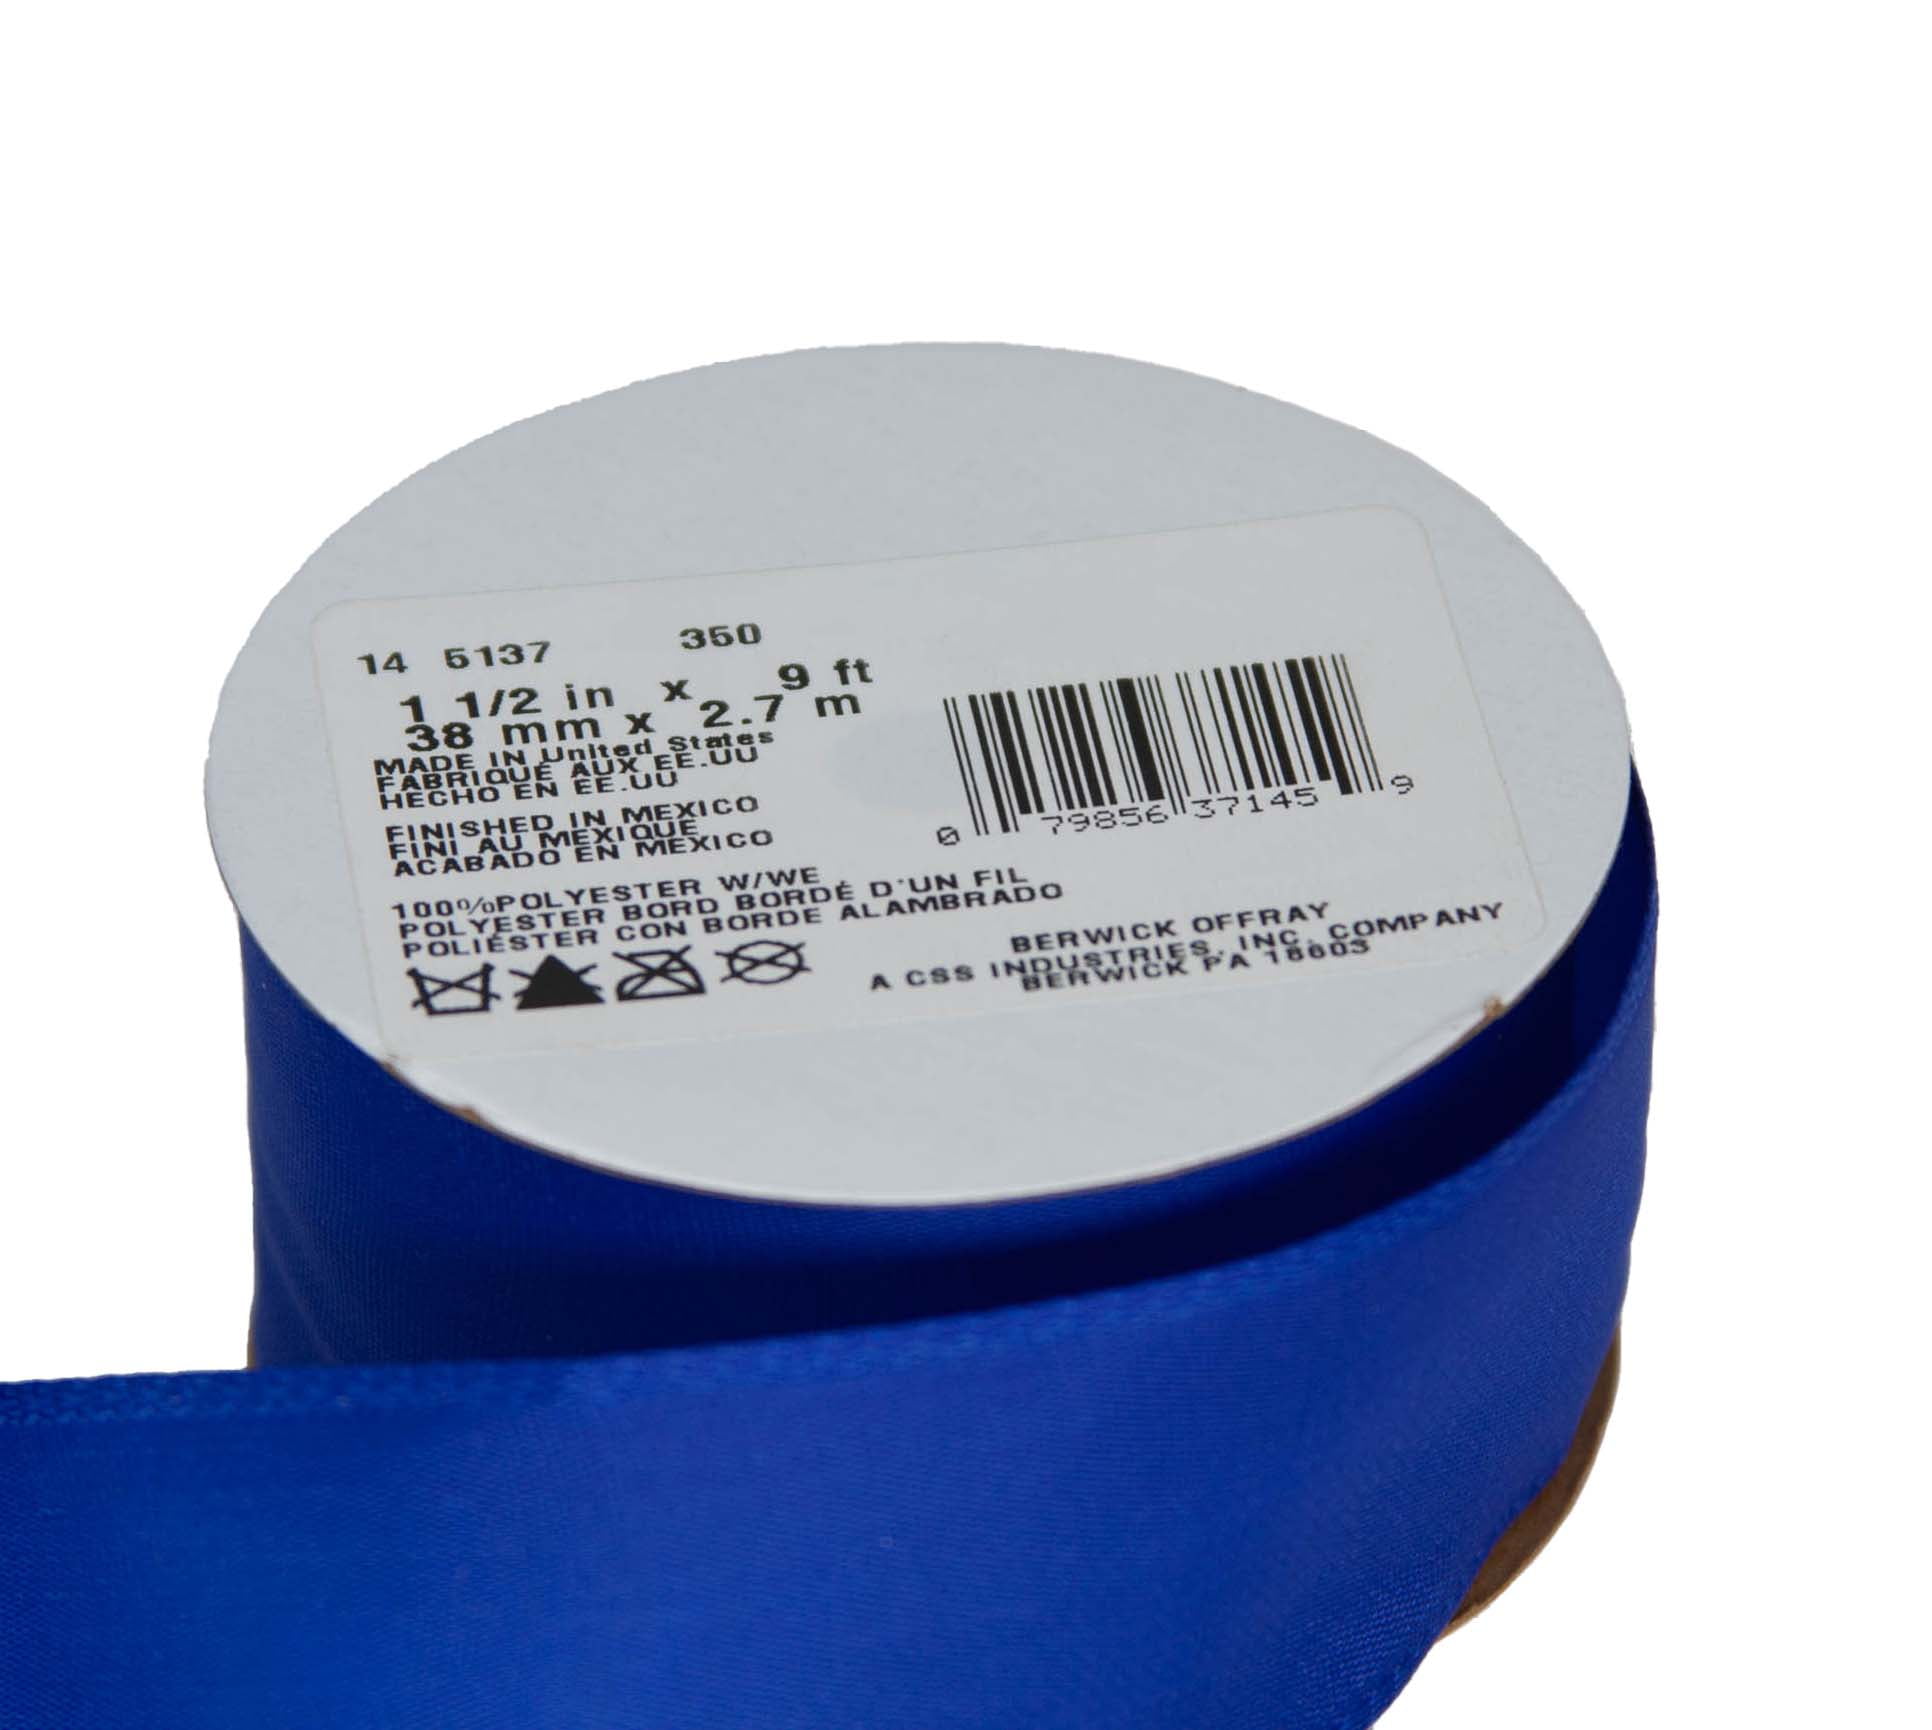 Blue Ombre Wire Edged Ribbon - 0.875 - Reversible - Ribbons - Trims